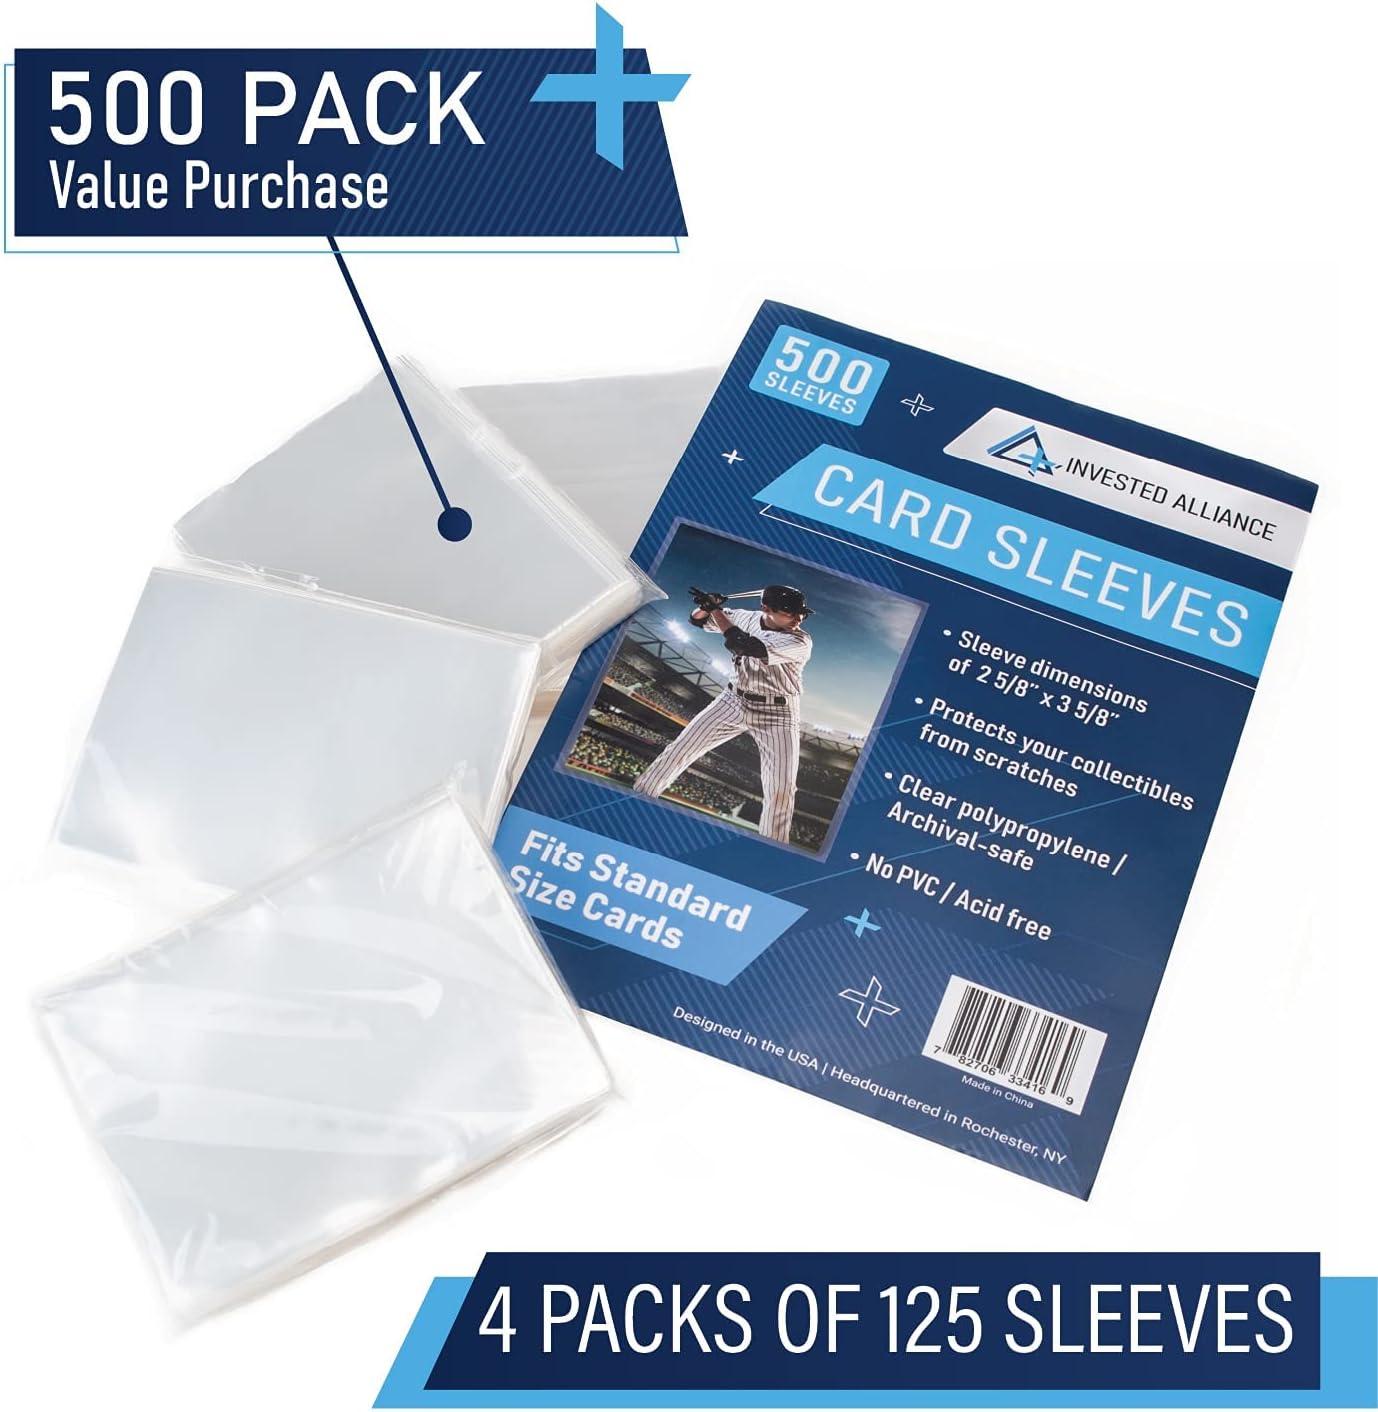 Ultra PRO 2.5 x 3.5 Soft Card Sleeves (500 Pack) – The Card Protectors